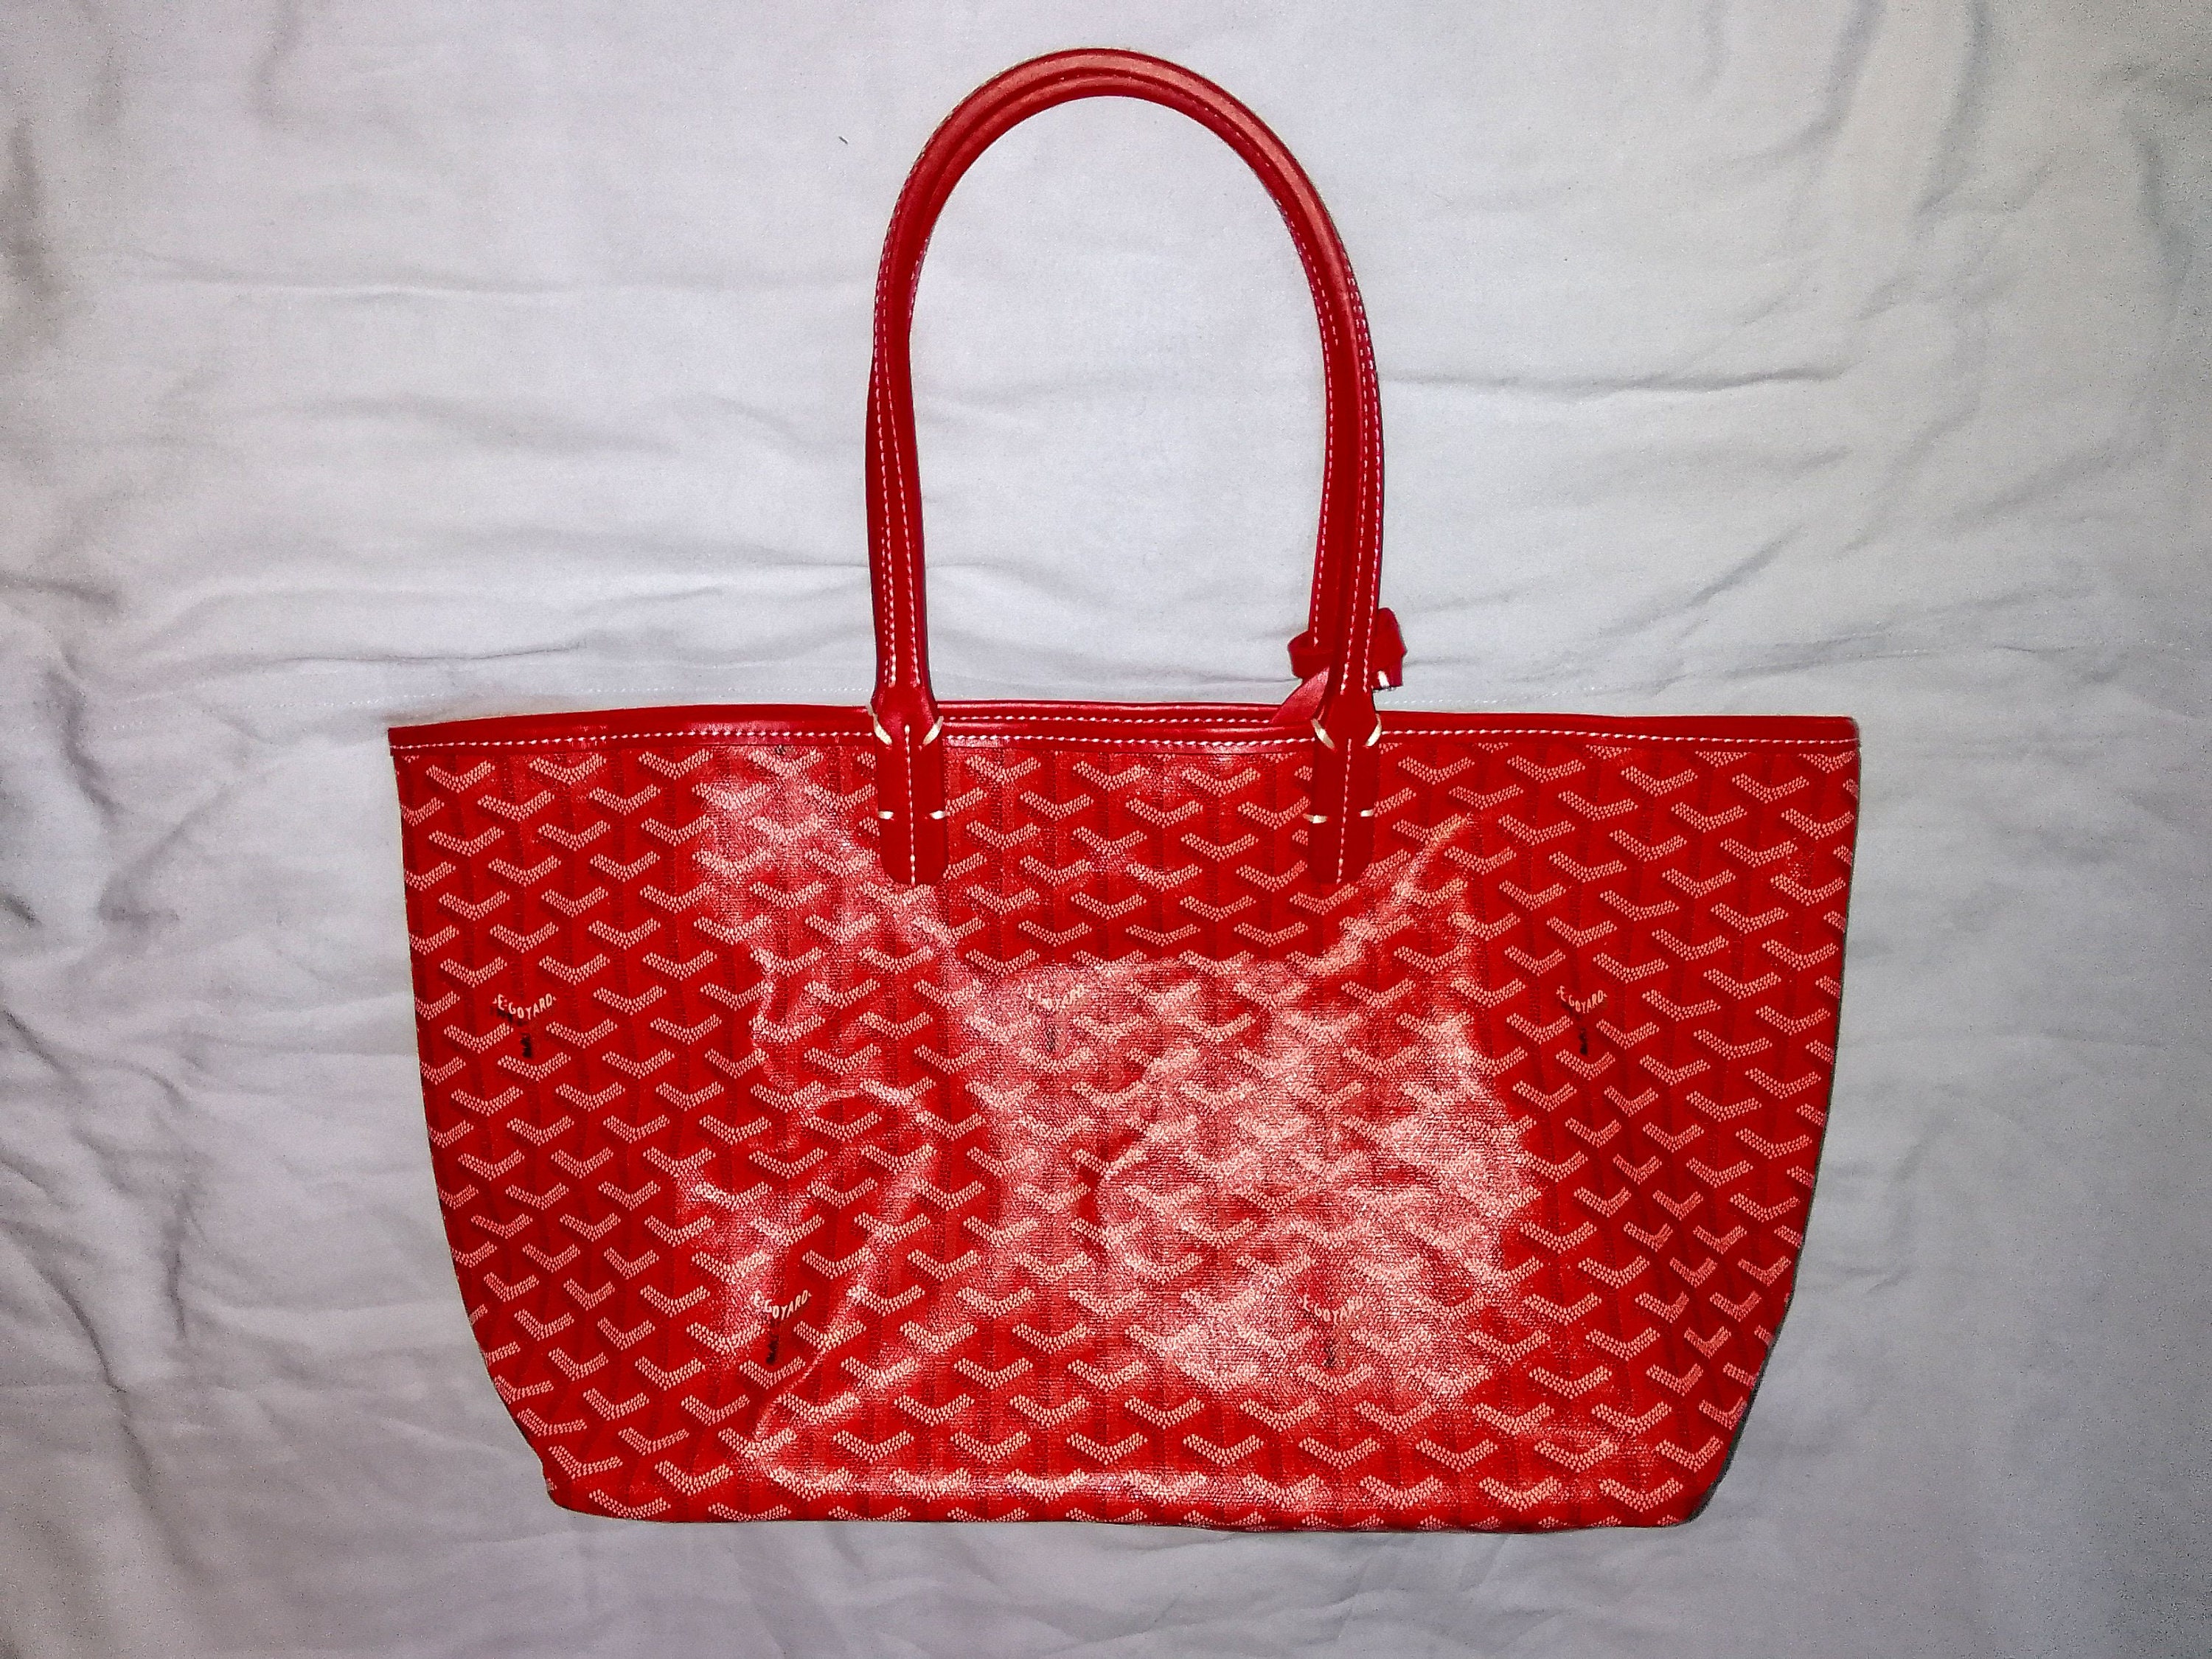 Bag and Purse Organizer with Zipper Top Style for Goyard St Louis and Anjou  (More colors available)